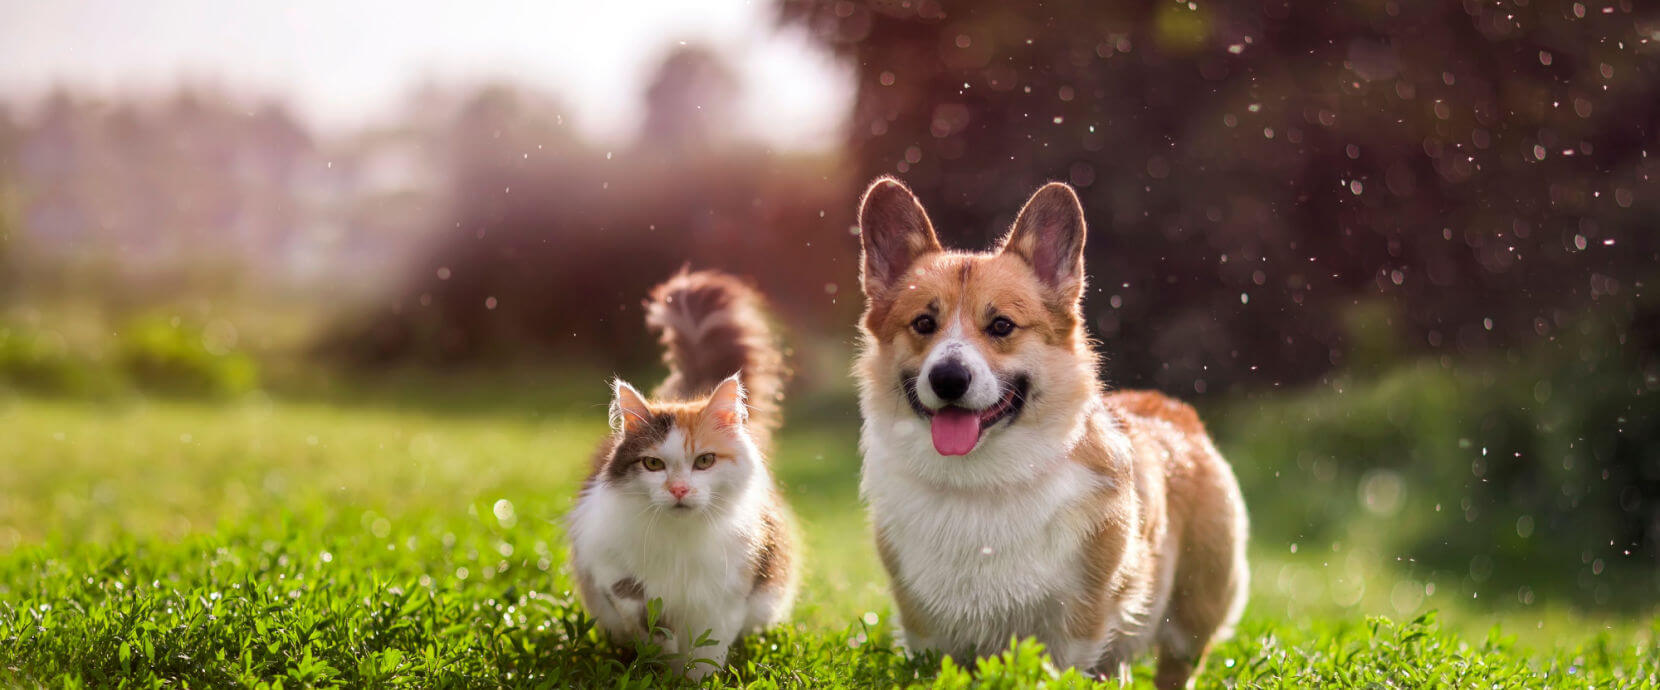 Cat and dog running in grass